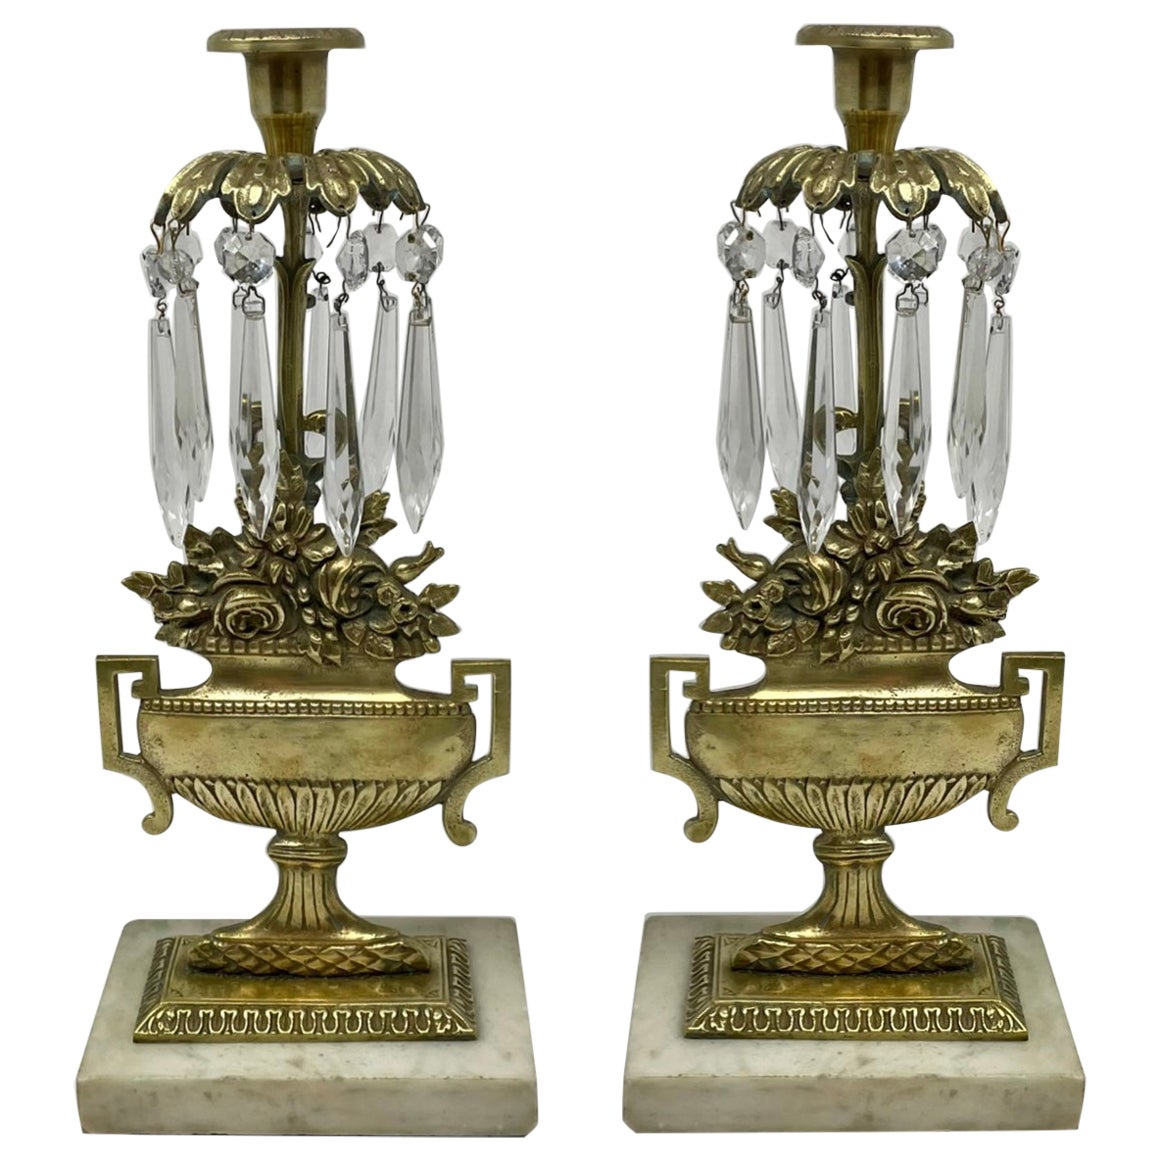 Pair of Antique American Brass and Crystal Candle Holders circa 1900